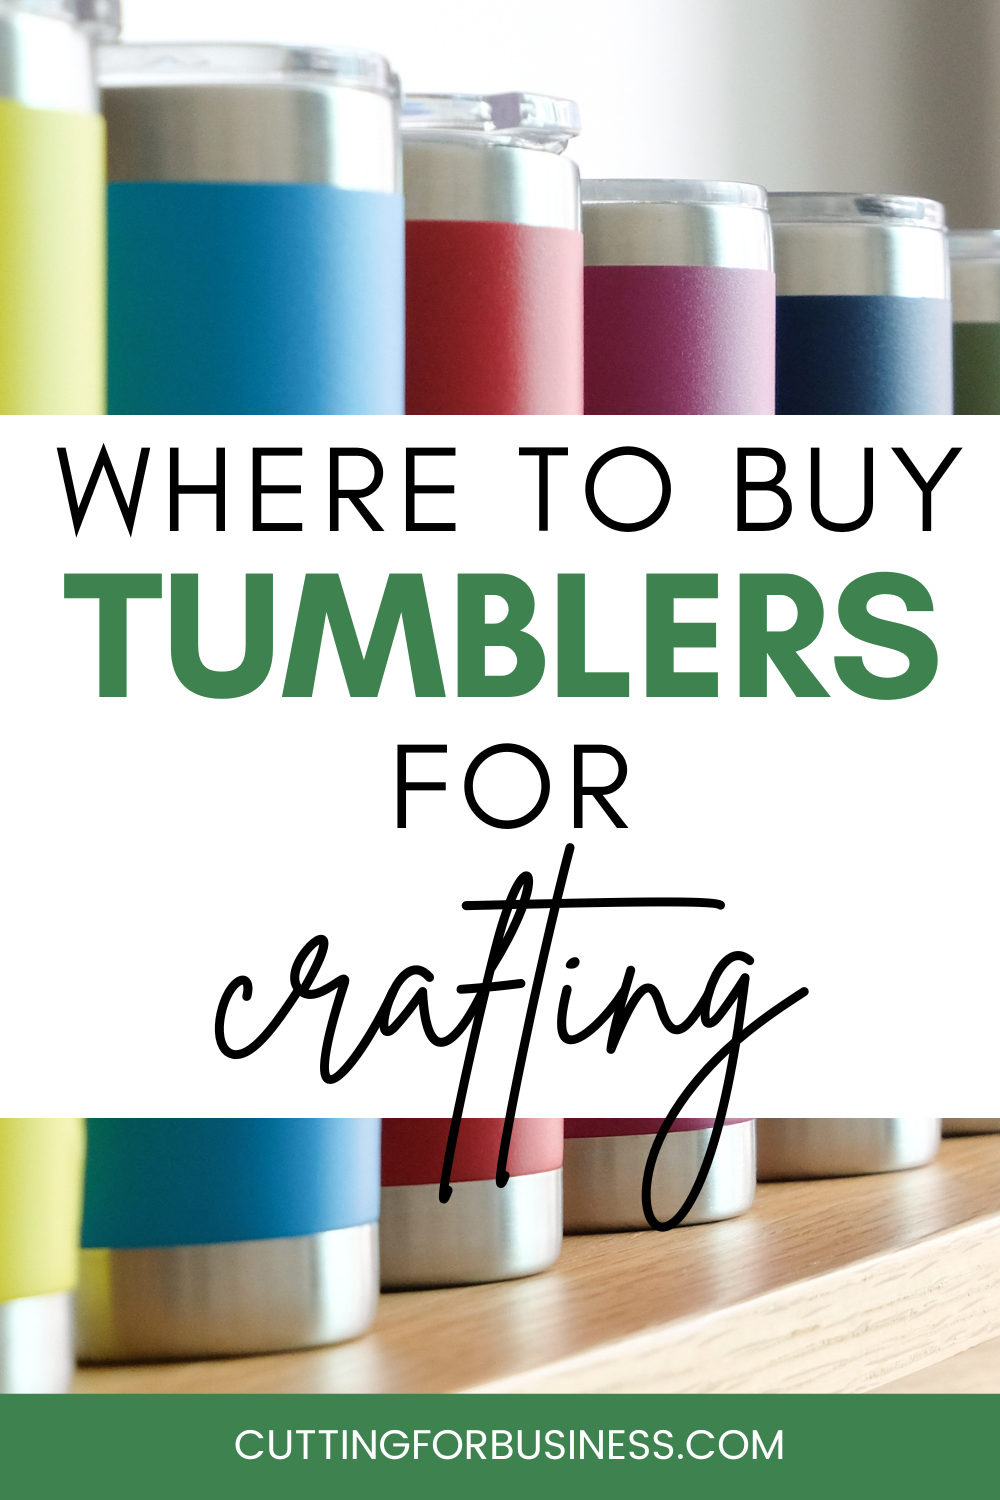 Where to Buy Tumblers for Crafting - cuttingforbusiness.com